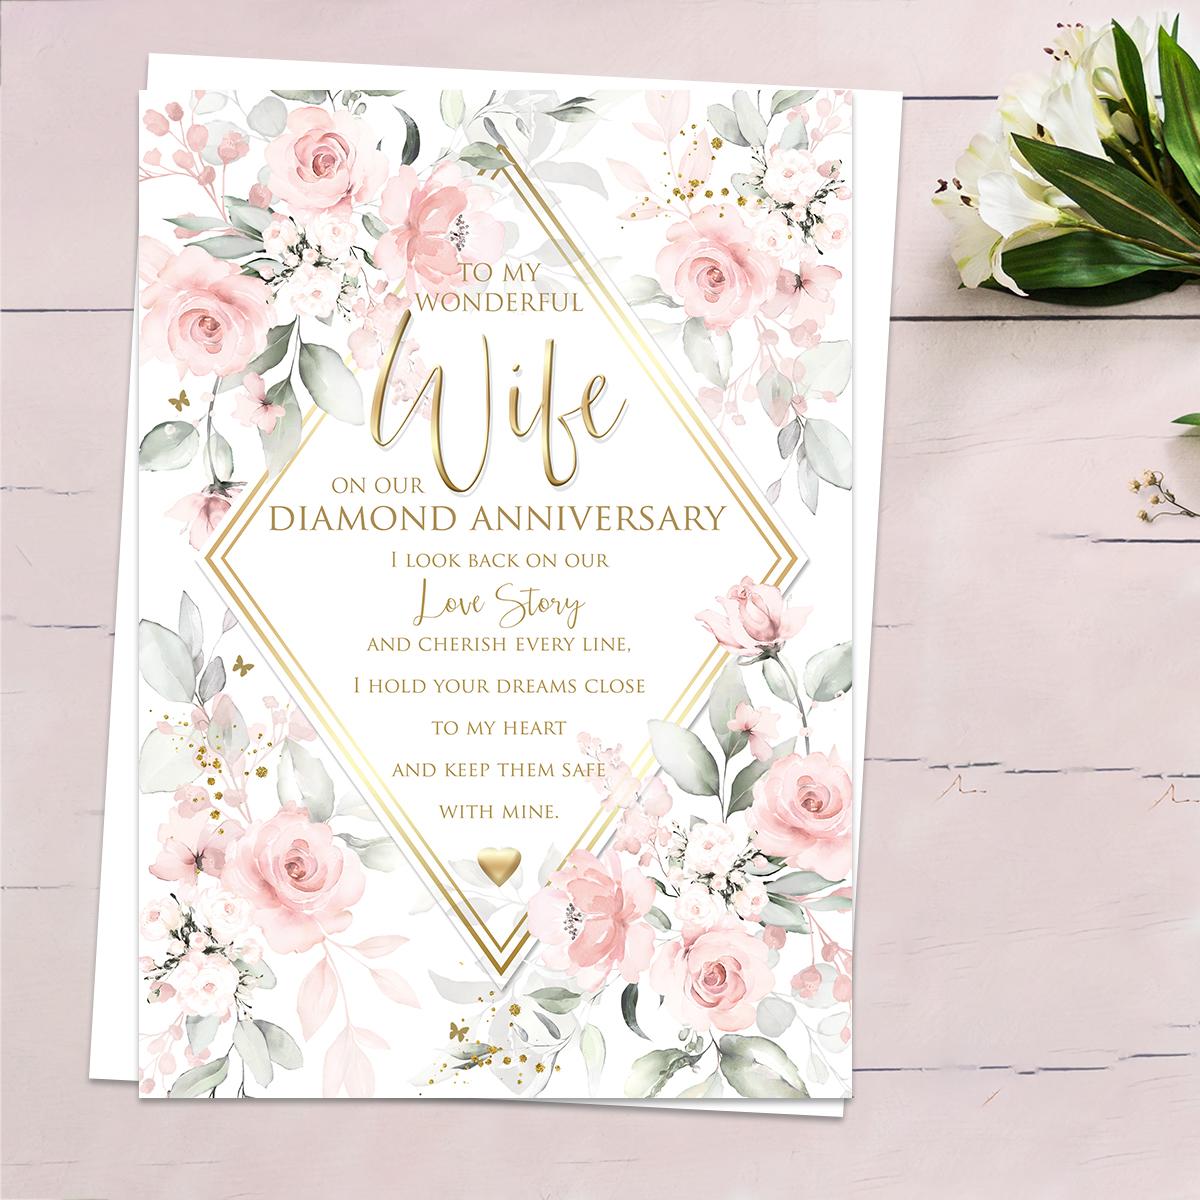 ' To My Wonderful Wife On Our Diamond Anniversary' Featuring Pale Pink Roses With Heartfelt Words And Gold Foiled Detail. Complete With White Envelope